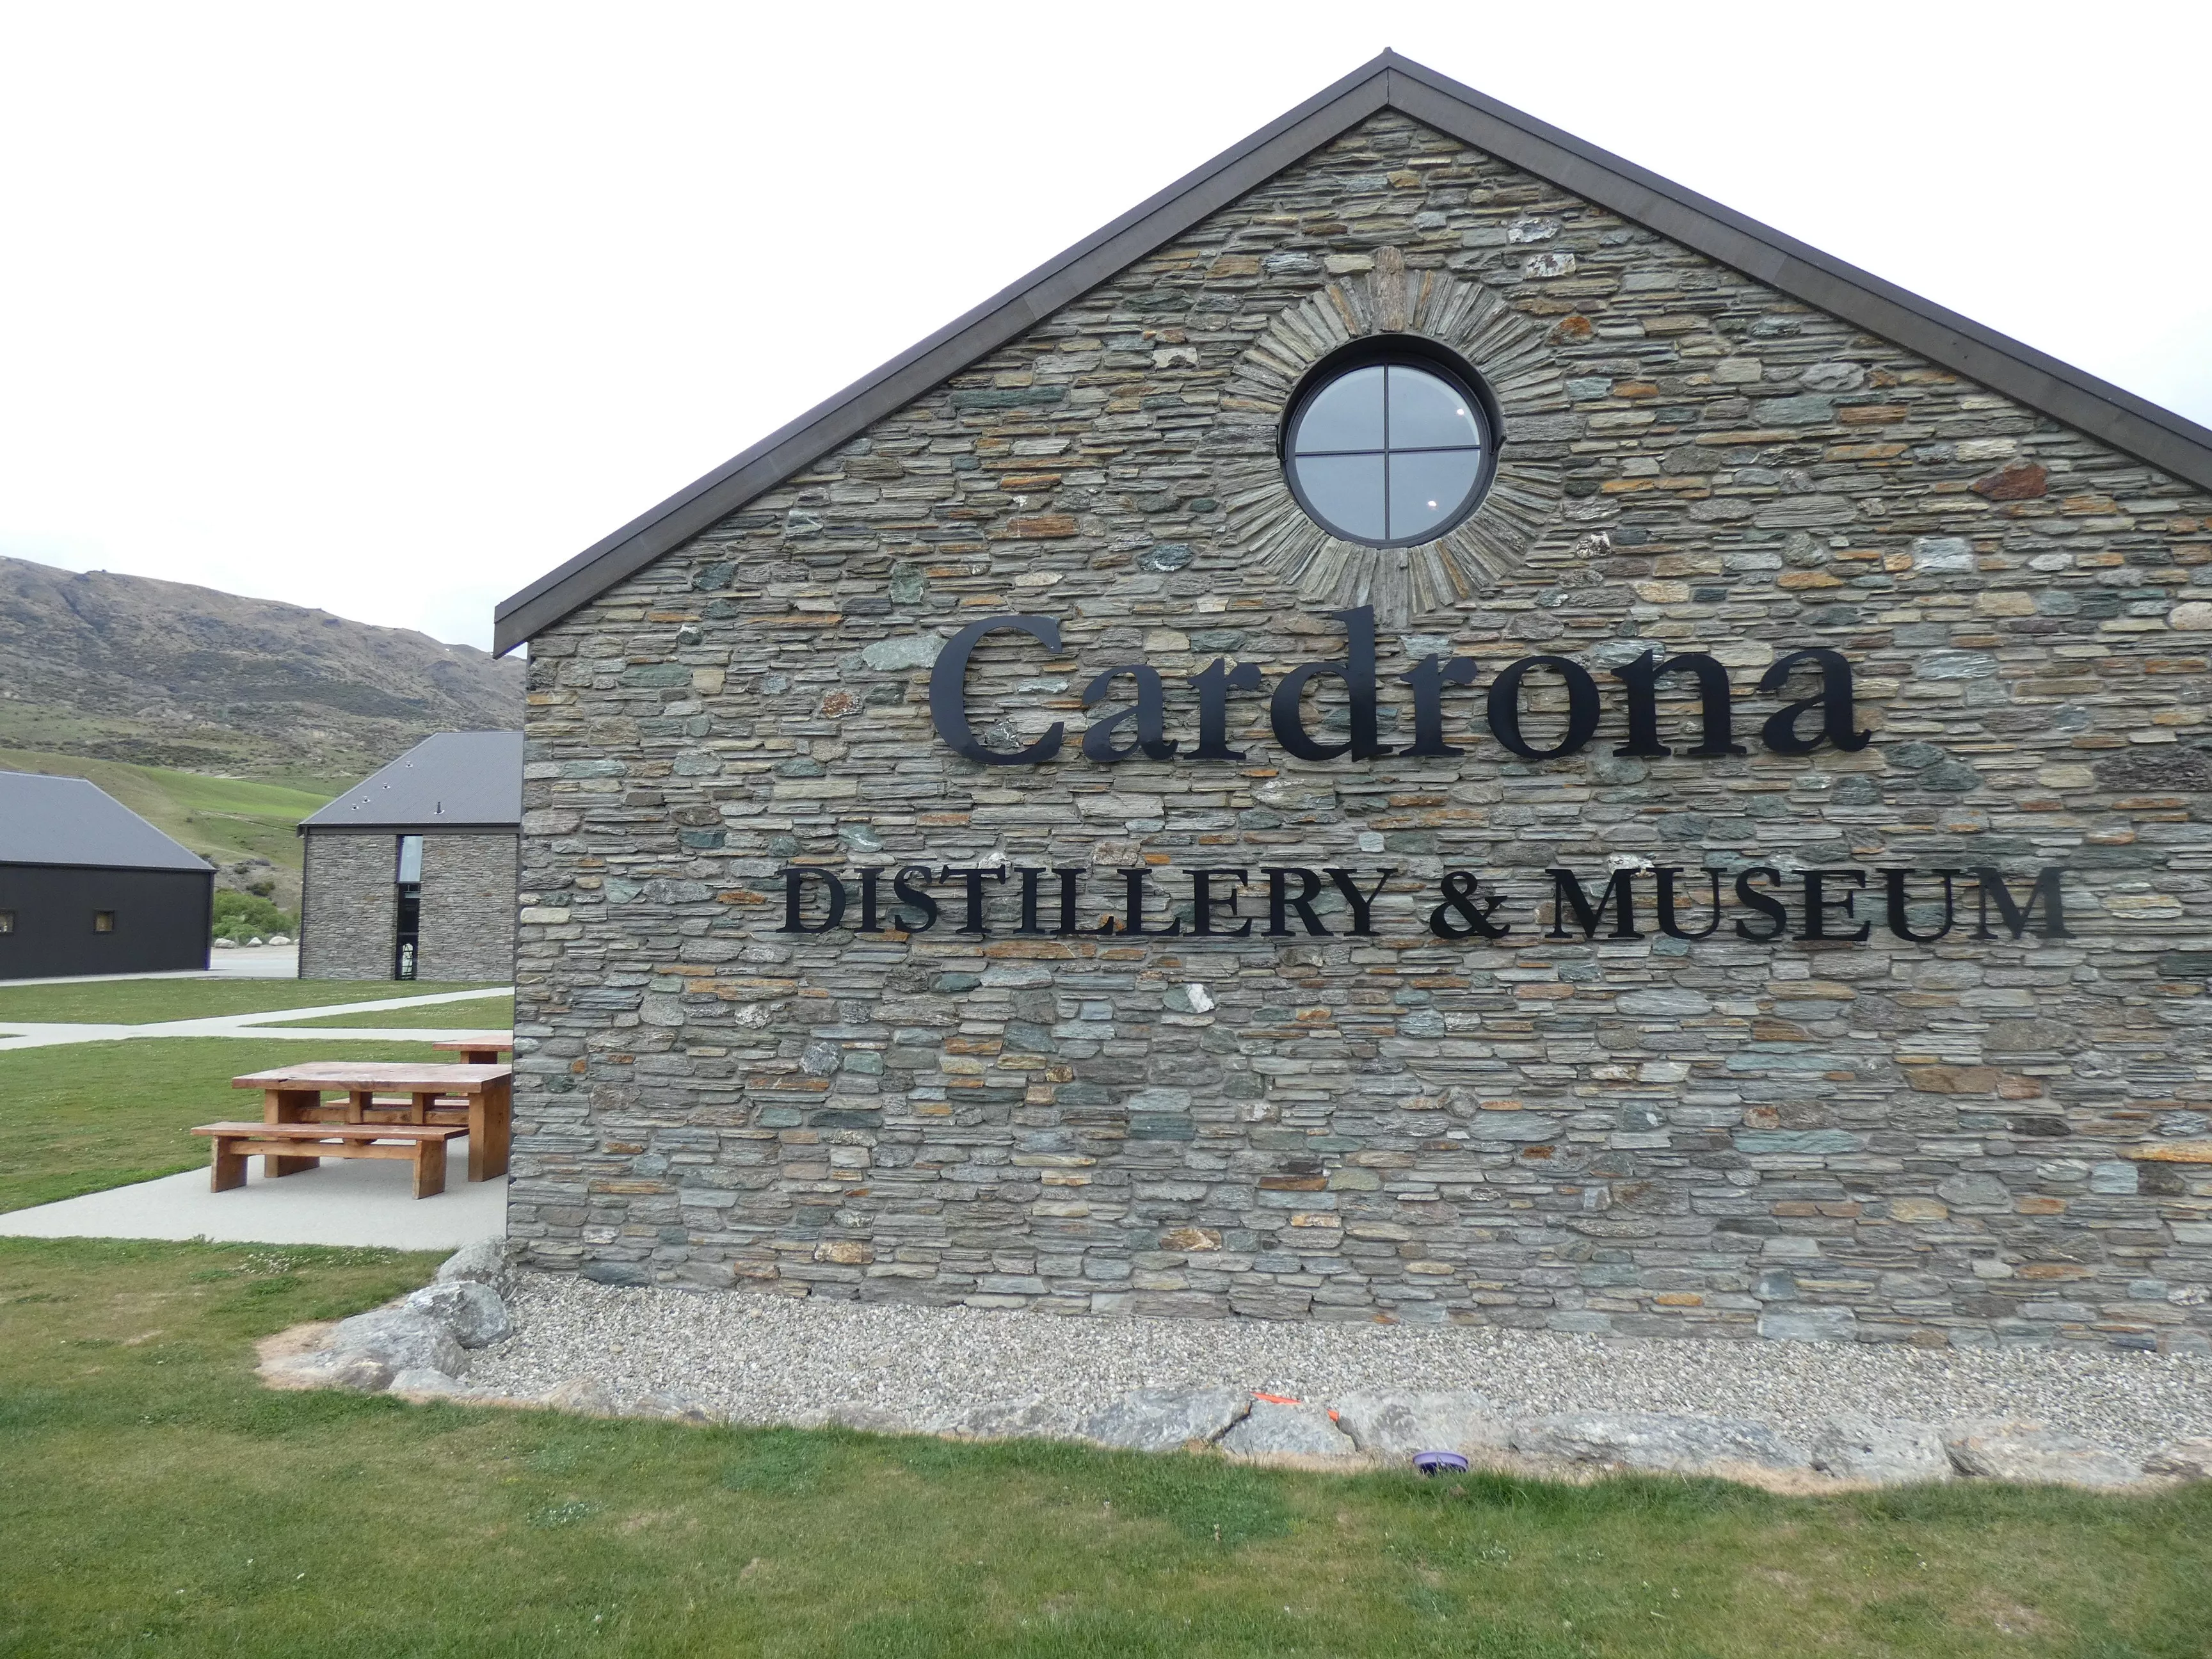 Cardrona Distillery in New Zealand, Australia and Oceania | Museums,Wineries - Rated 0.9